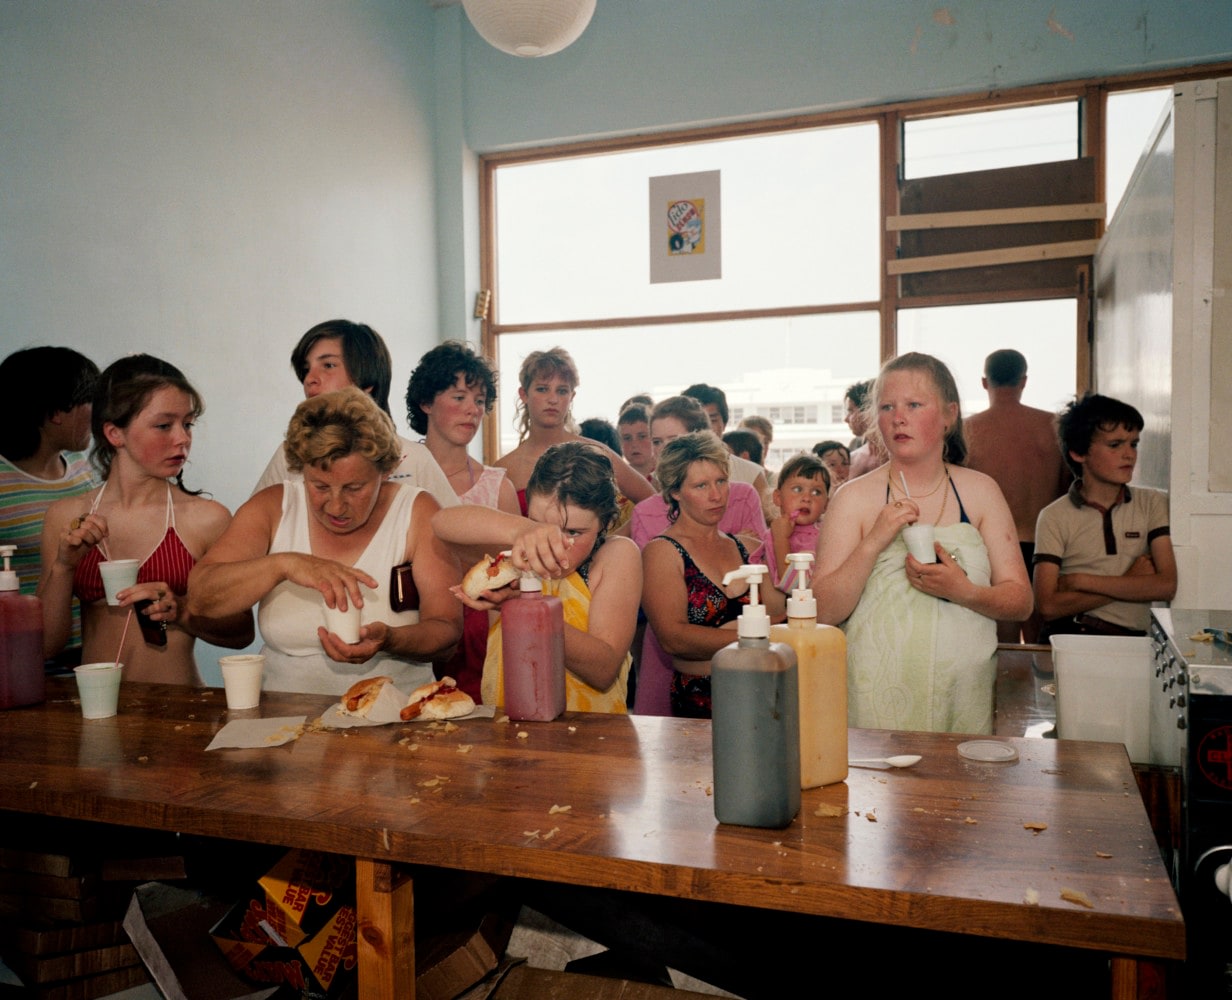 Martin Parr, Untitled (Plate 24) from The Last Resort, 1983-86